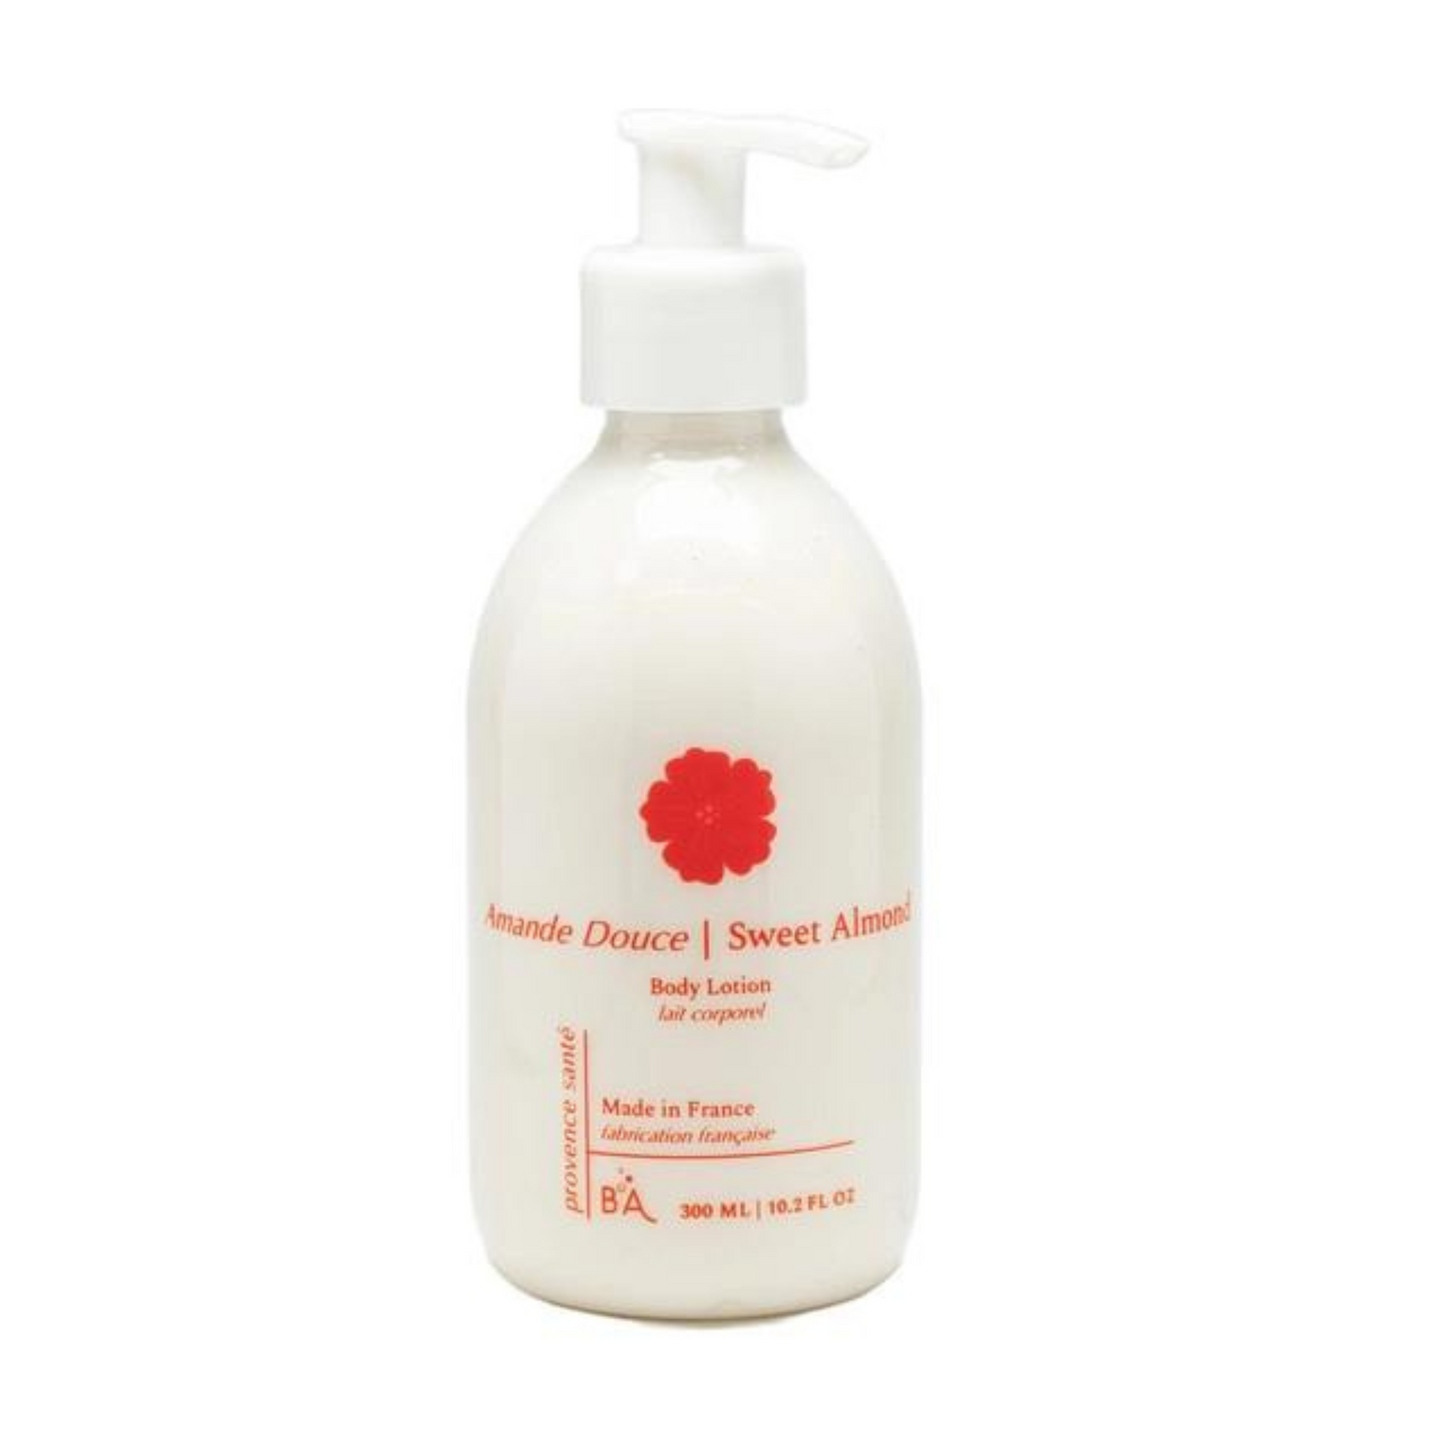 Primary Image of Provence Sante Sweet Almond Body Lotion (10.2 oz) 